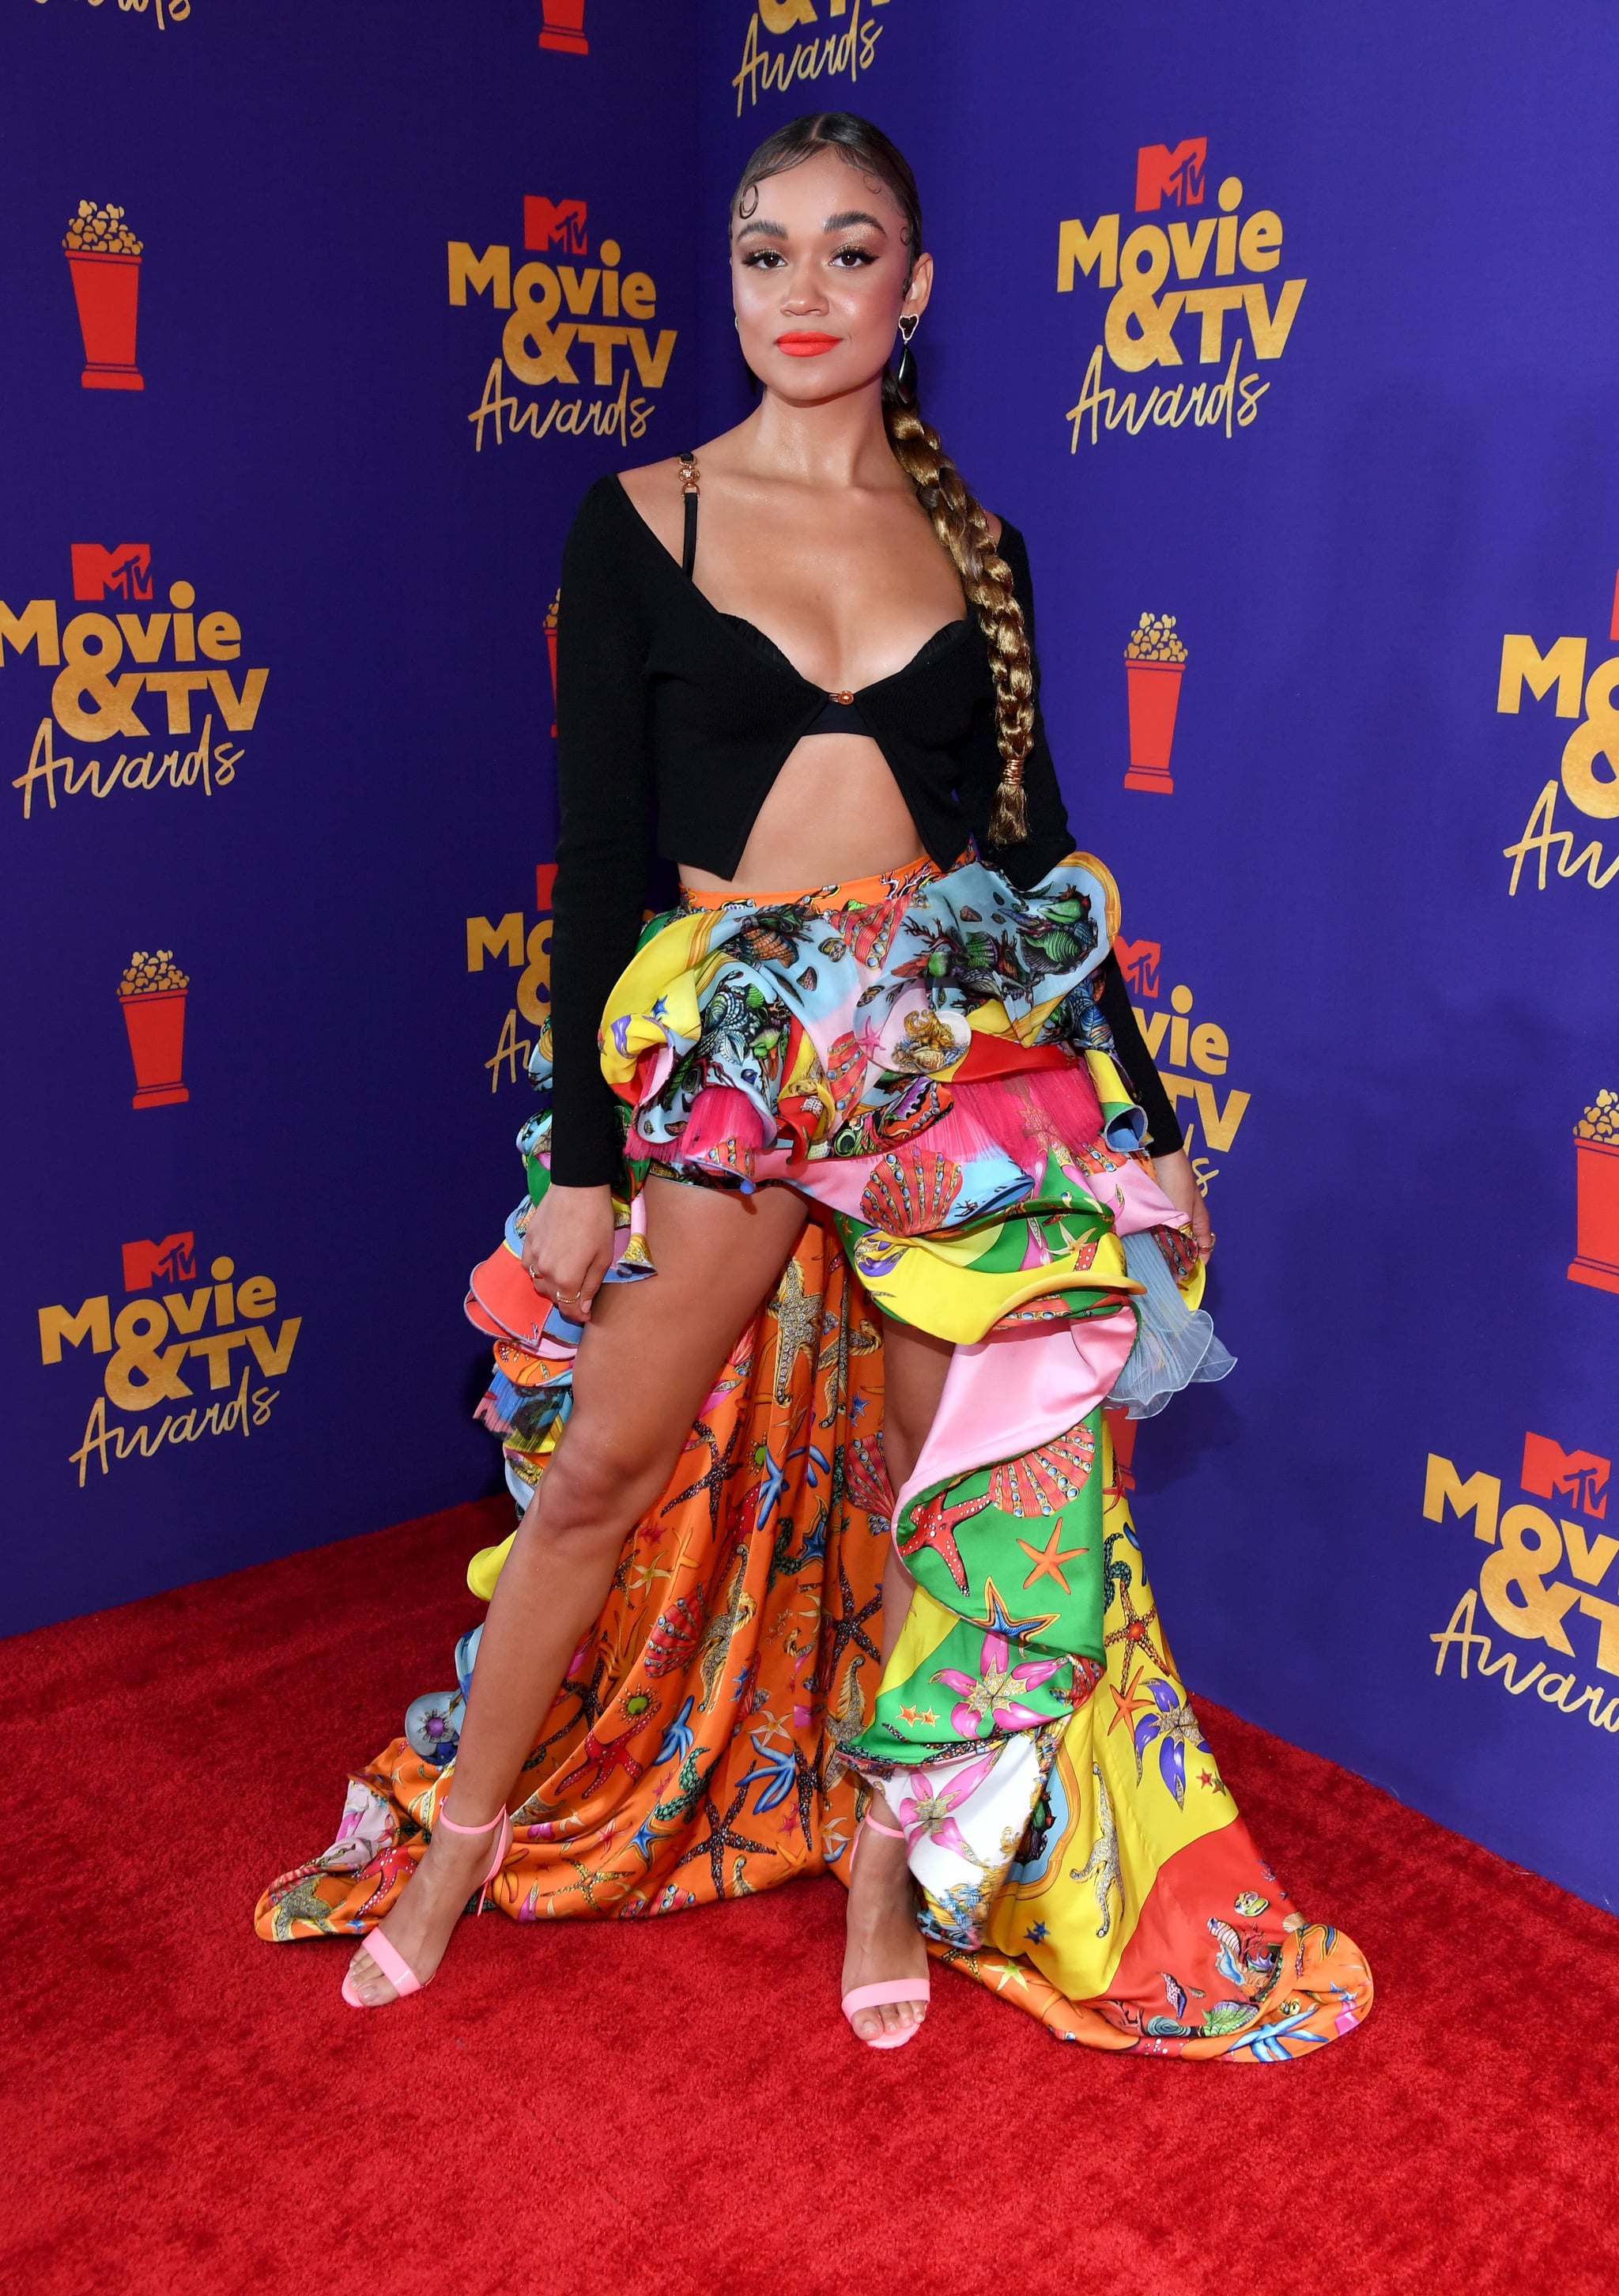 Madison Bailey At The 21 Mtv Movie And Tv Awards The Mtv Movie Tv Awards Brought Out The Glam Minidresses And Jordan Sneakers Popsugar Fashion Photo 4